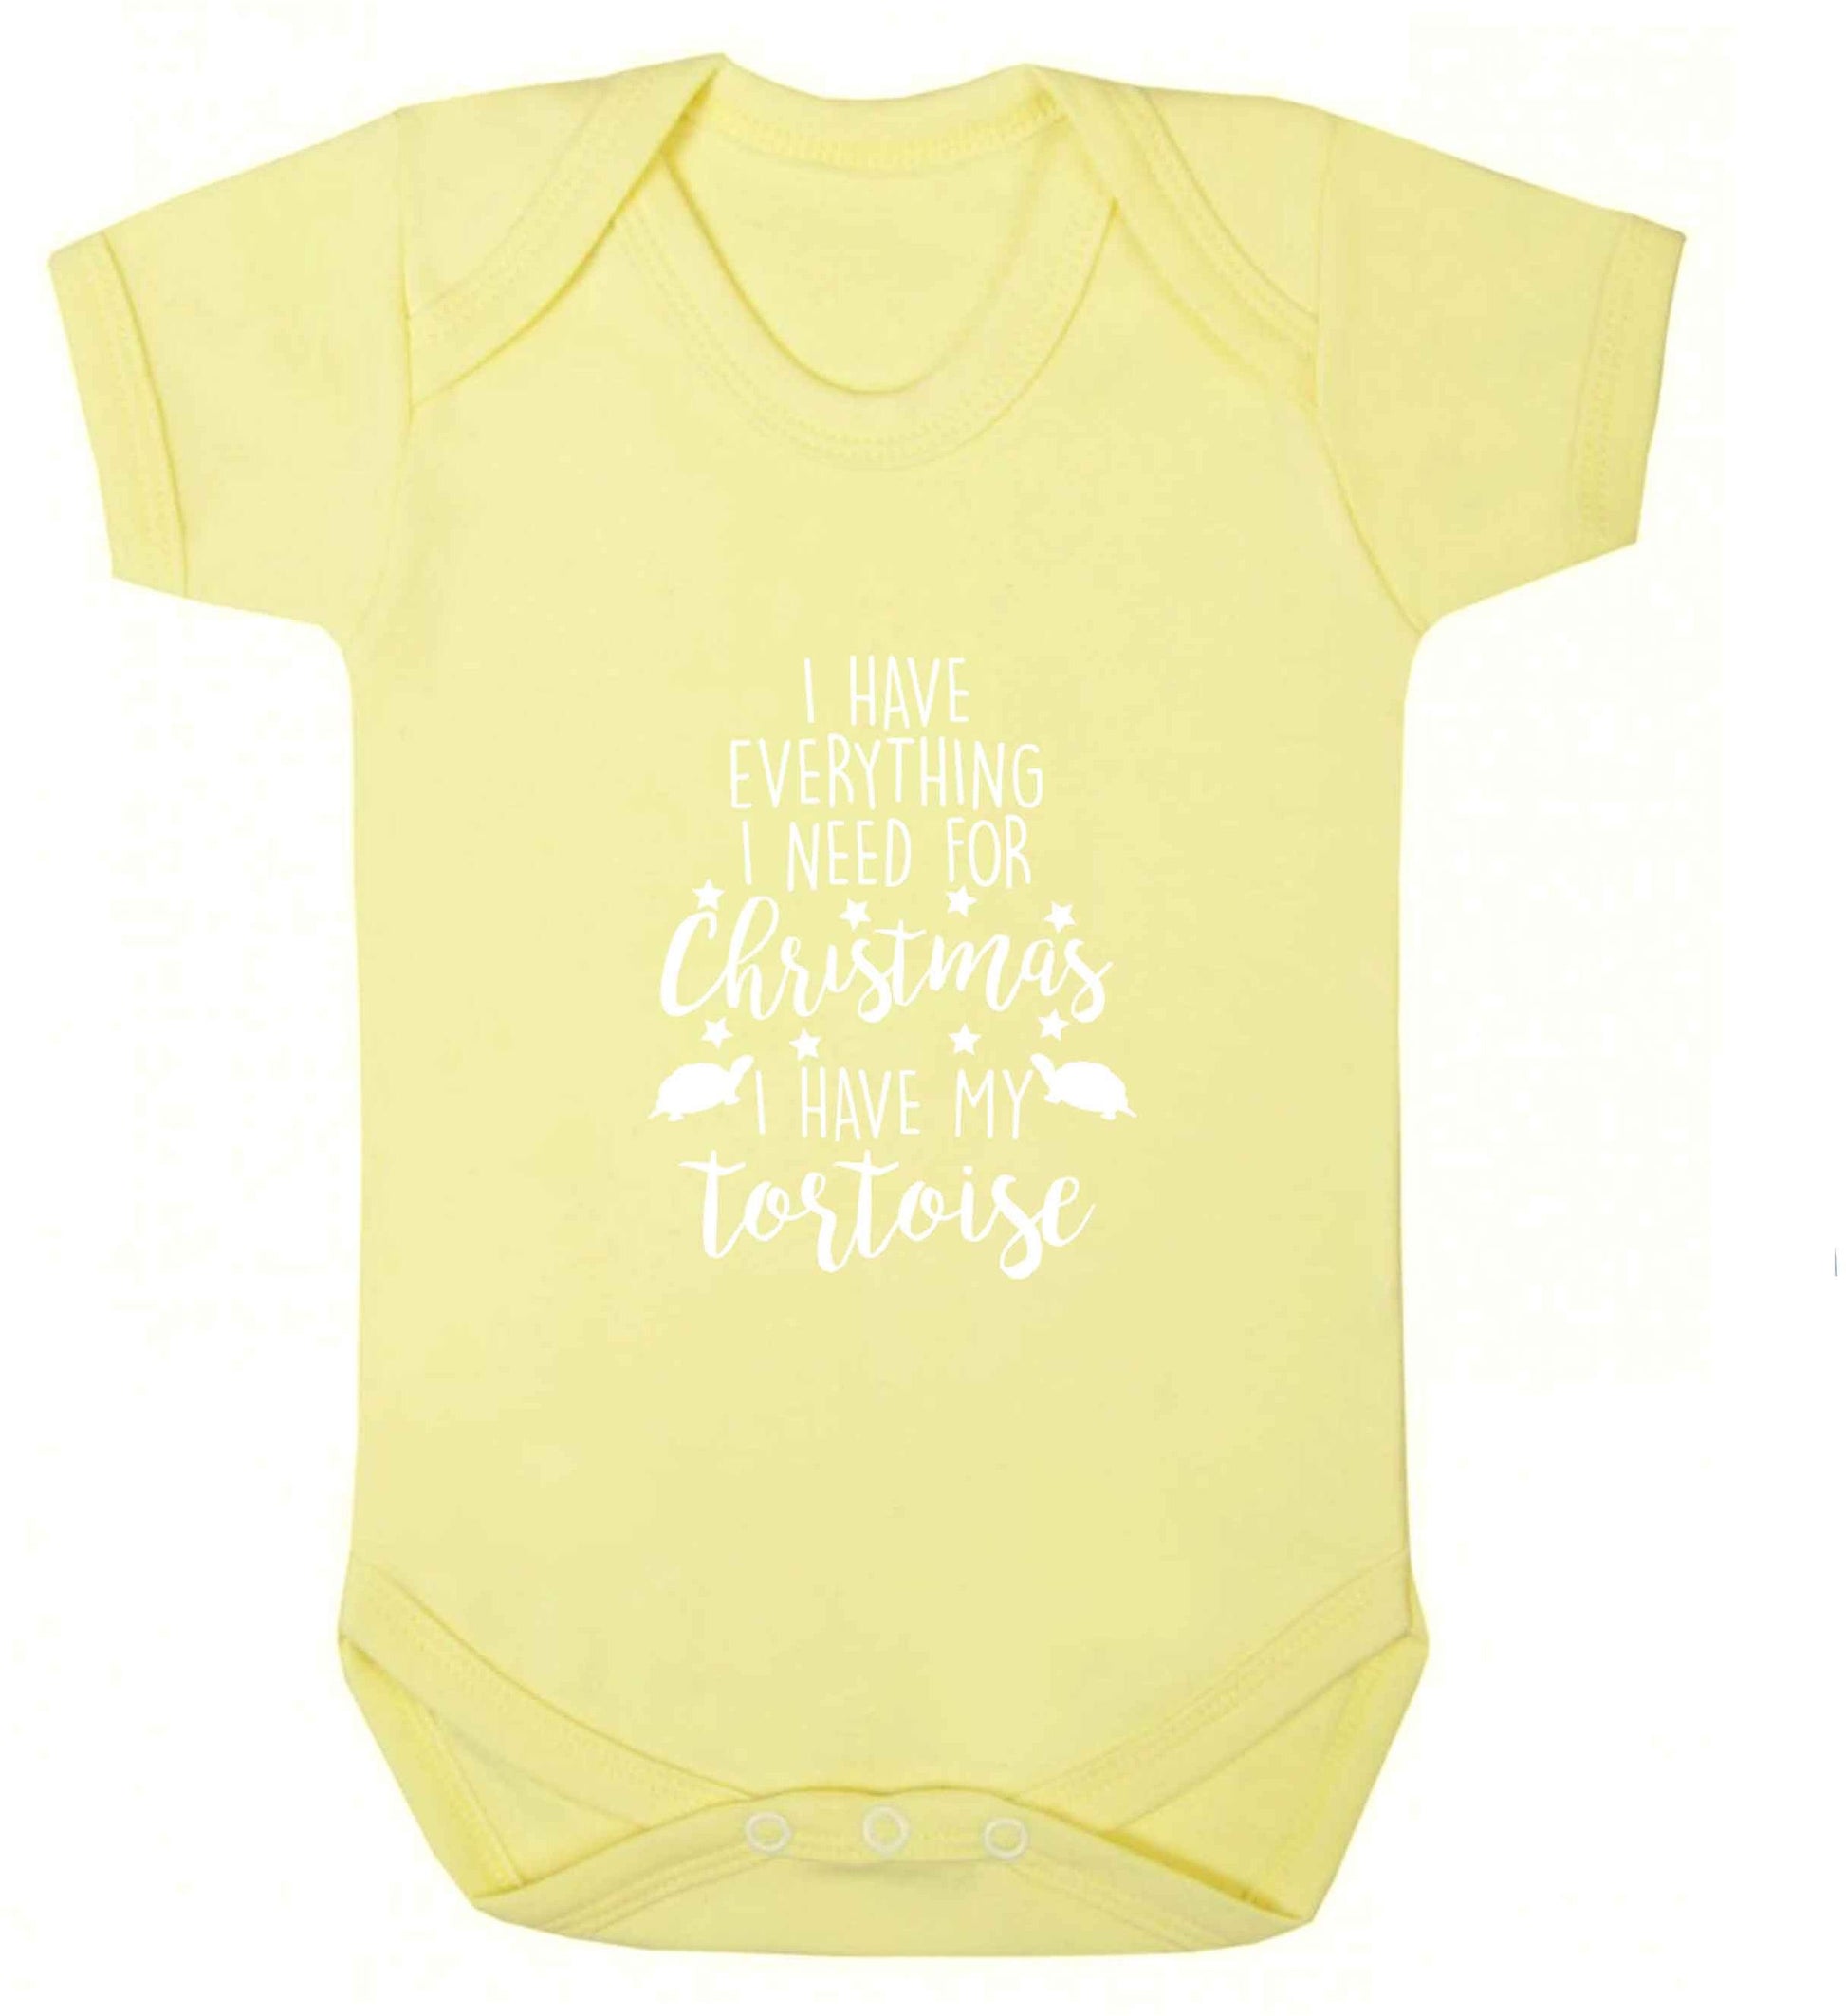 I have everything I need for Christmas I have my tortoise baby vest pale yellow 18-24 months